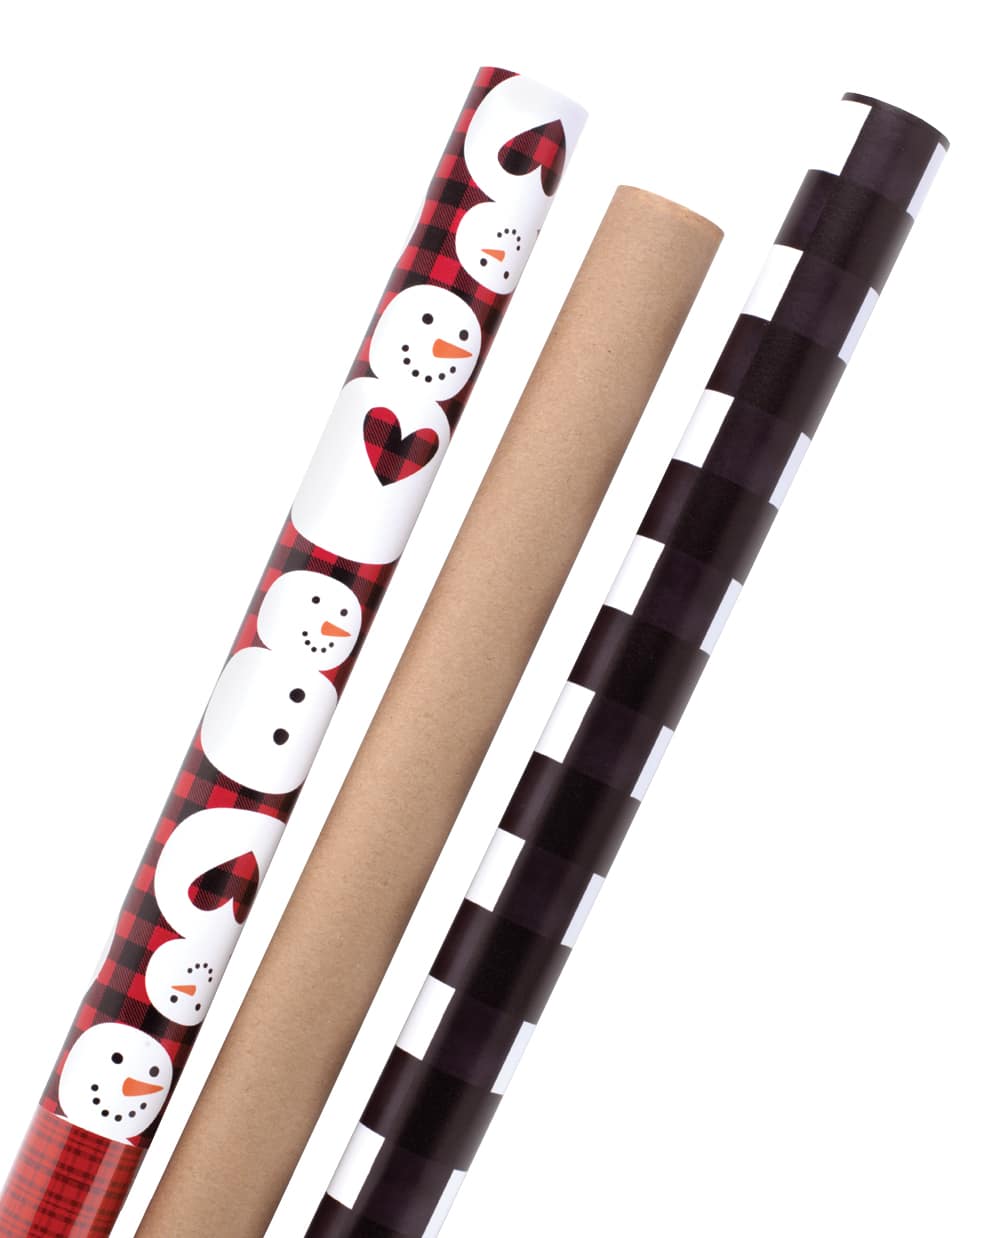 Example of a 3-roll wrapping paper set